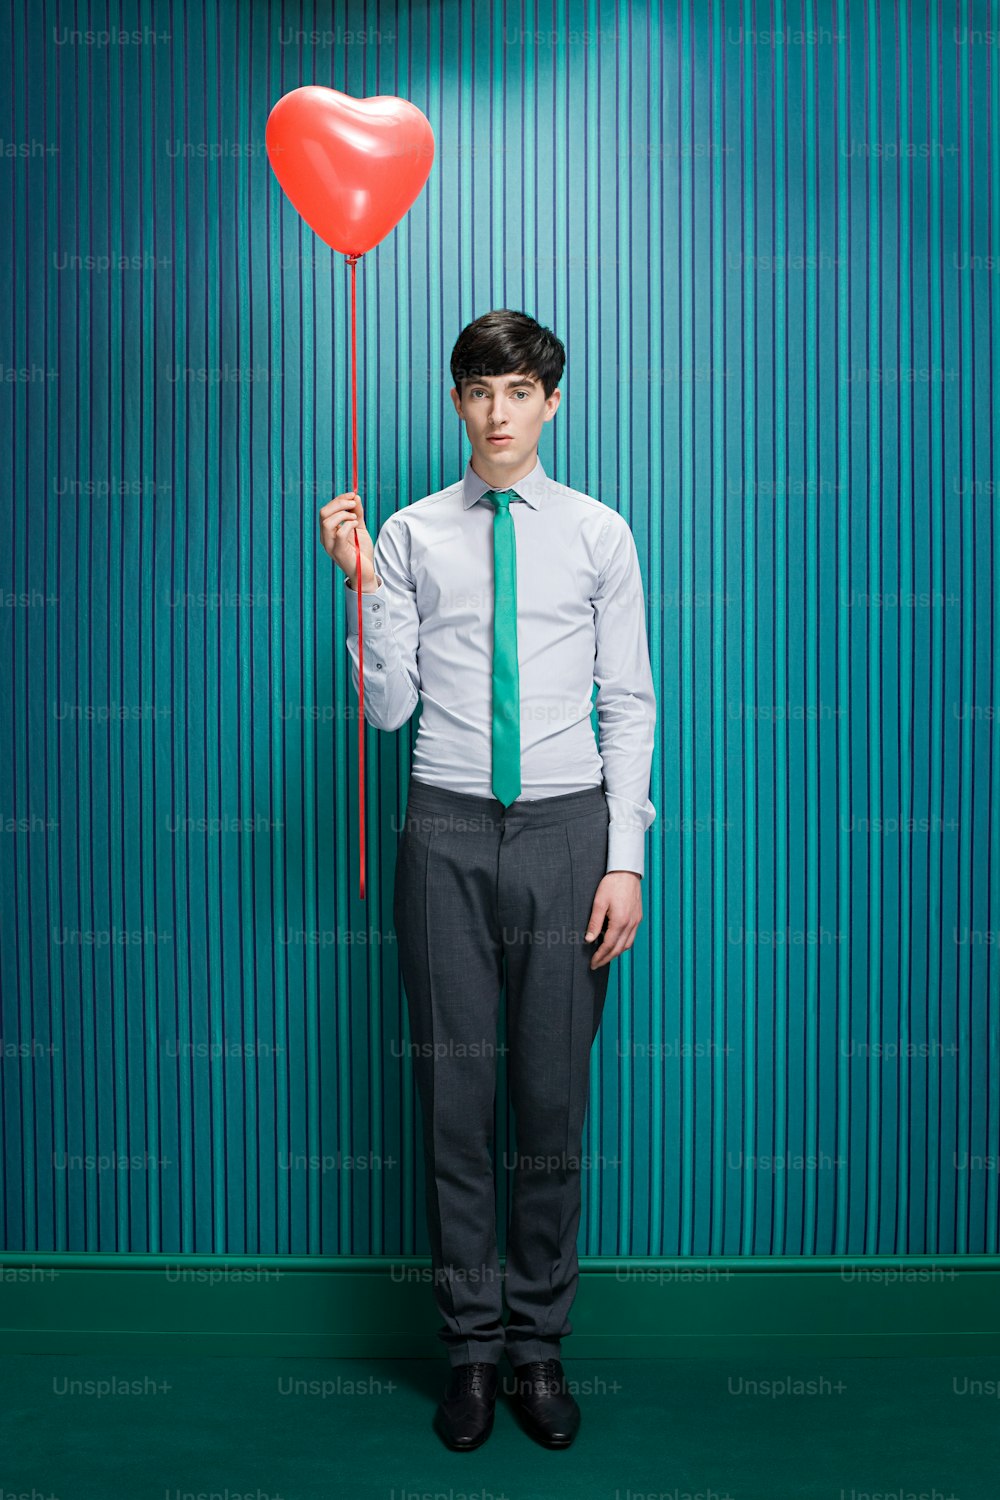 a man in a tie holding a heart balloon